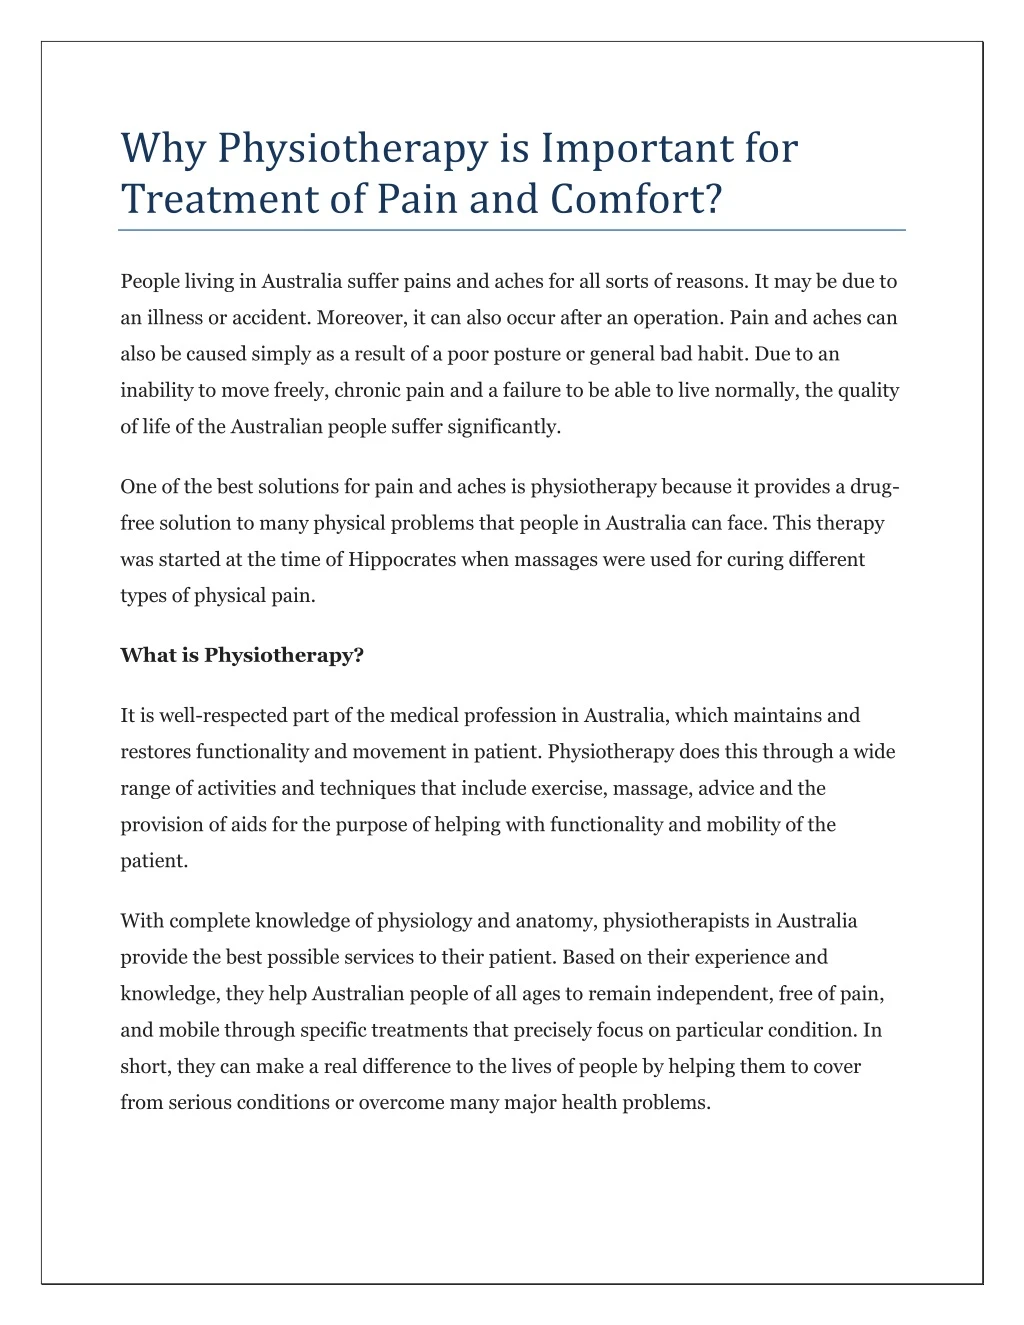 why physiotherapy is important for treatment